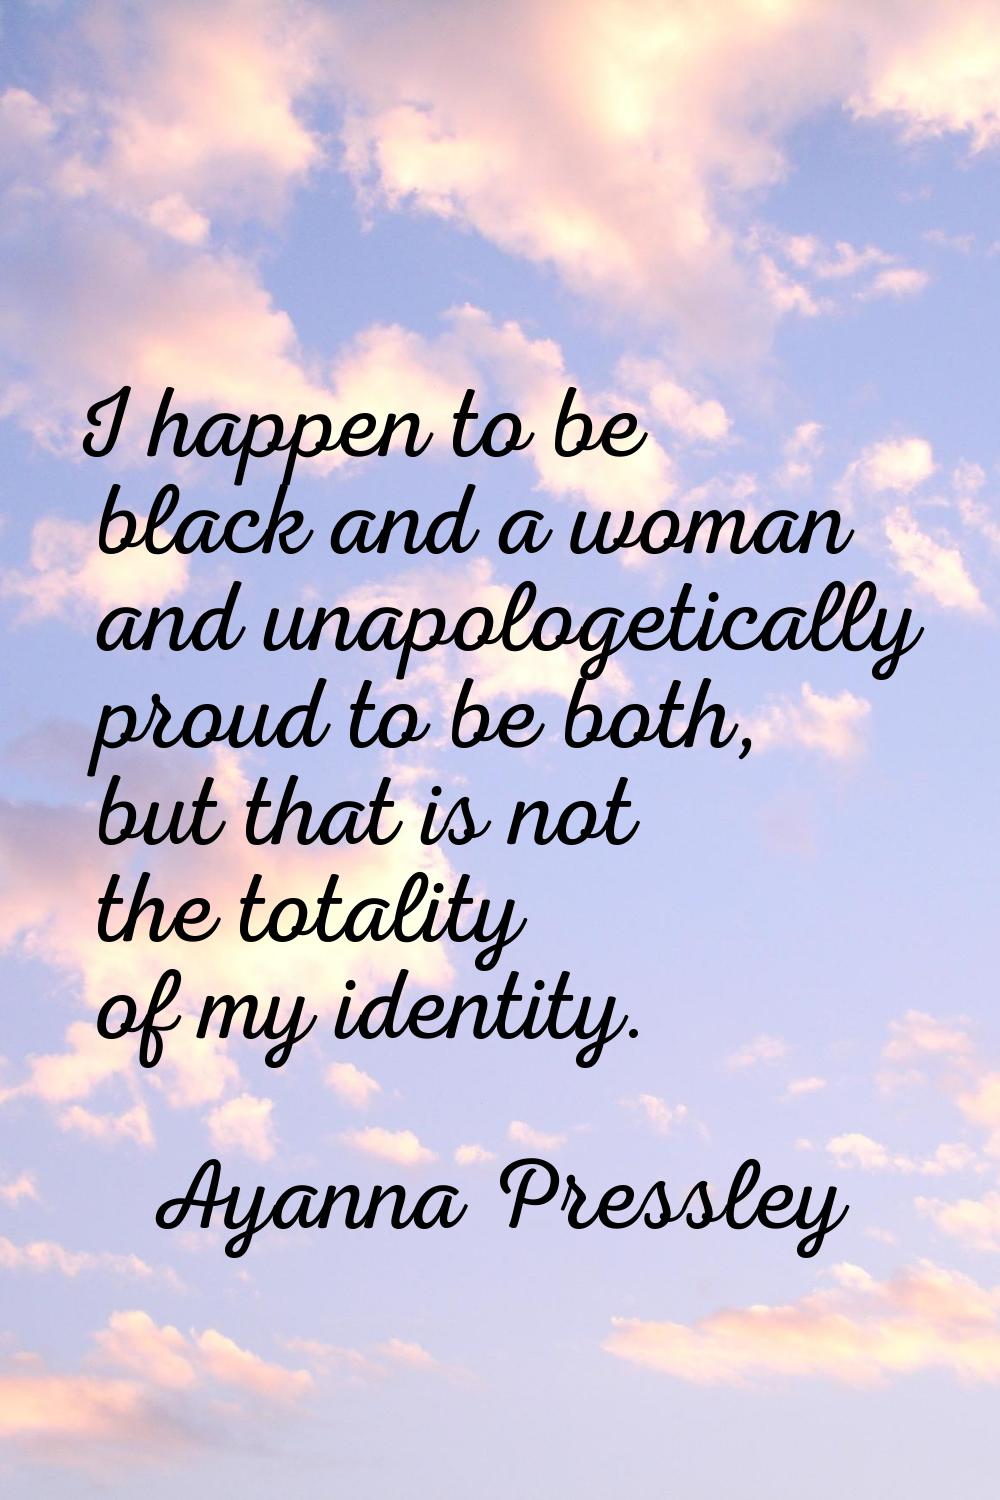 I happen to be black and a woman and unapologetically proud to be both, but that is not the totalit